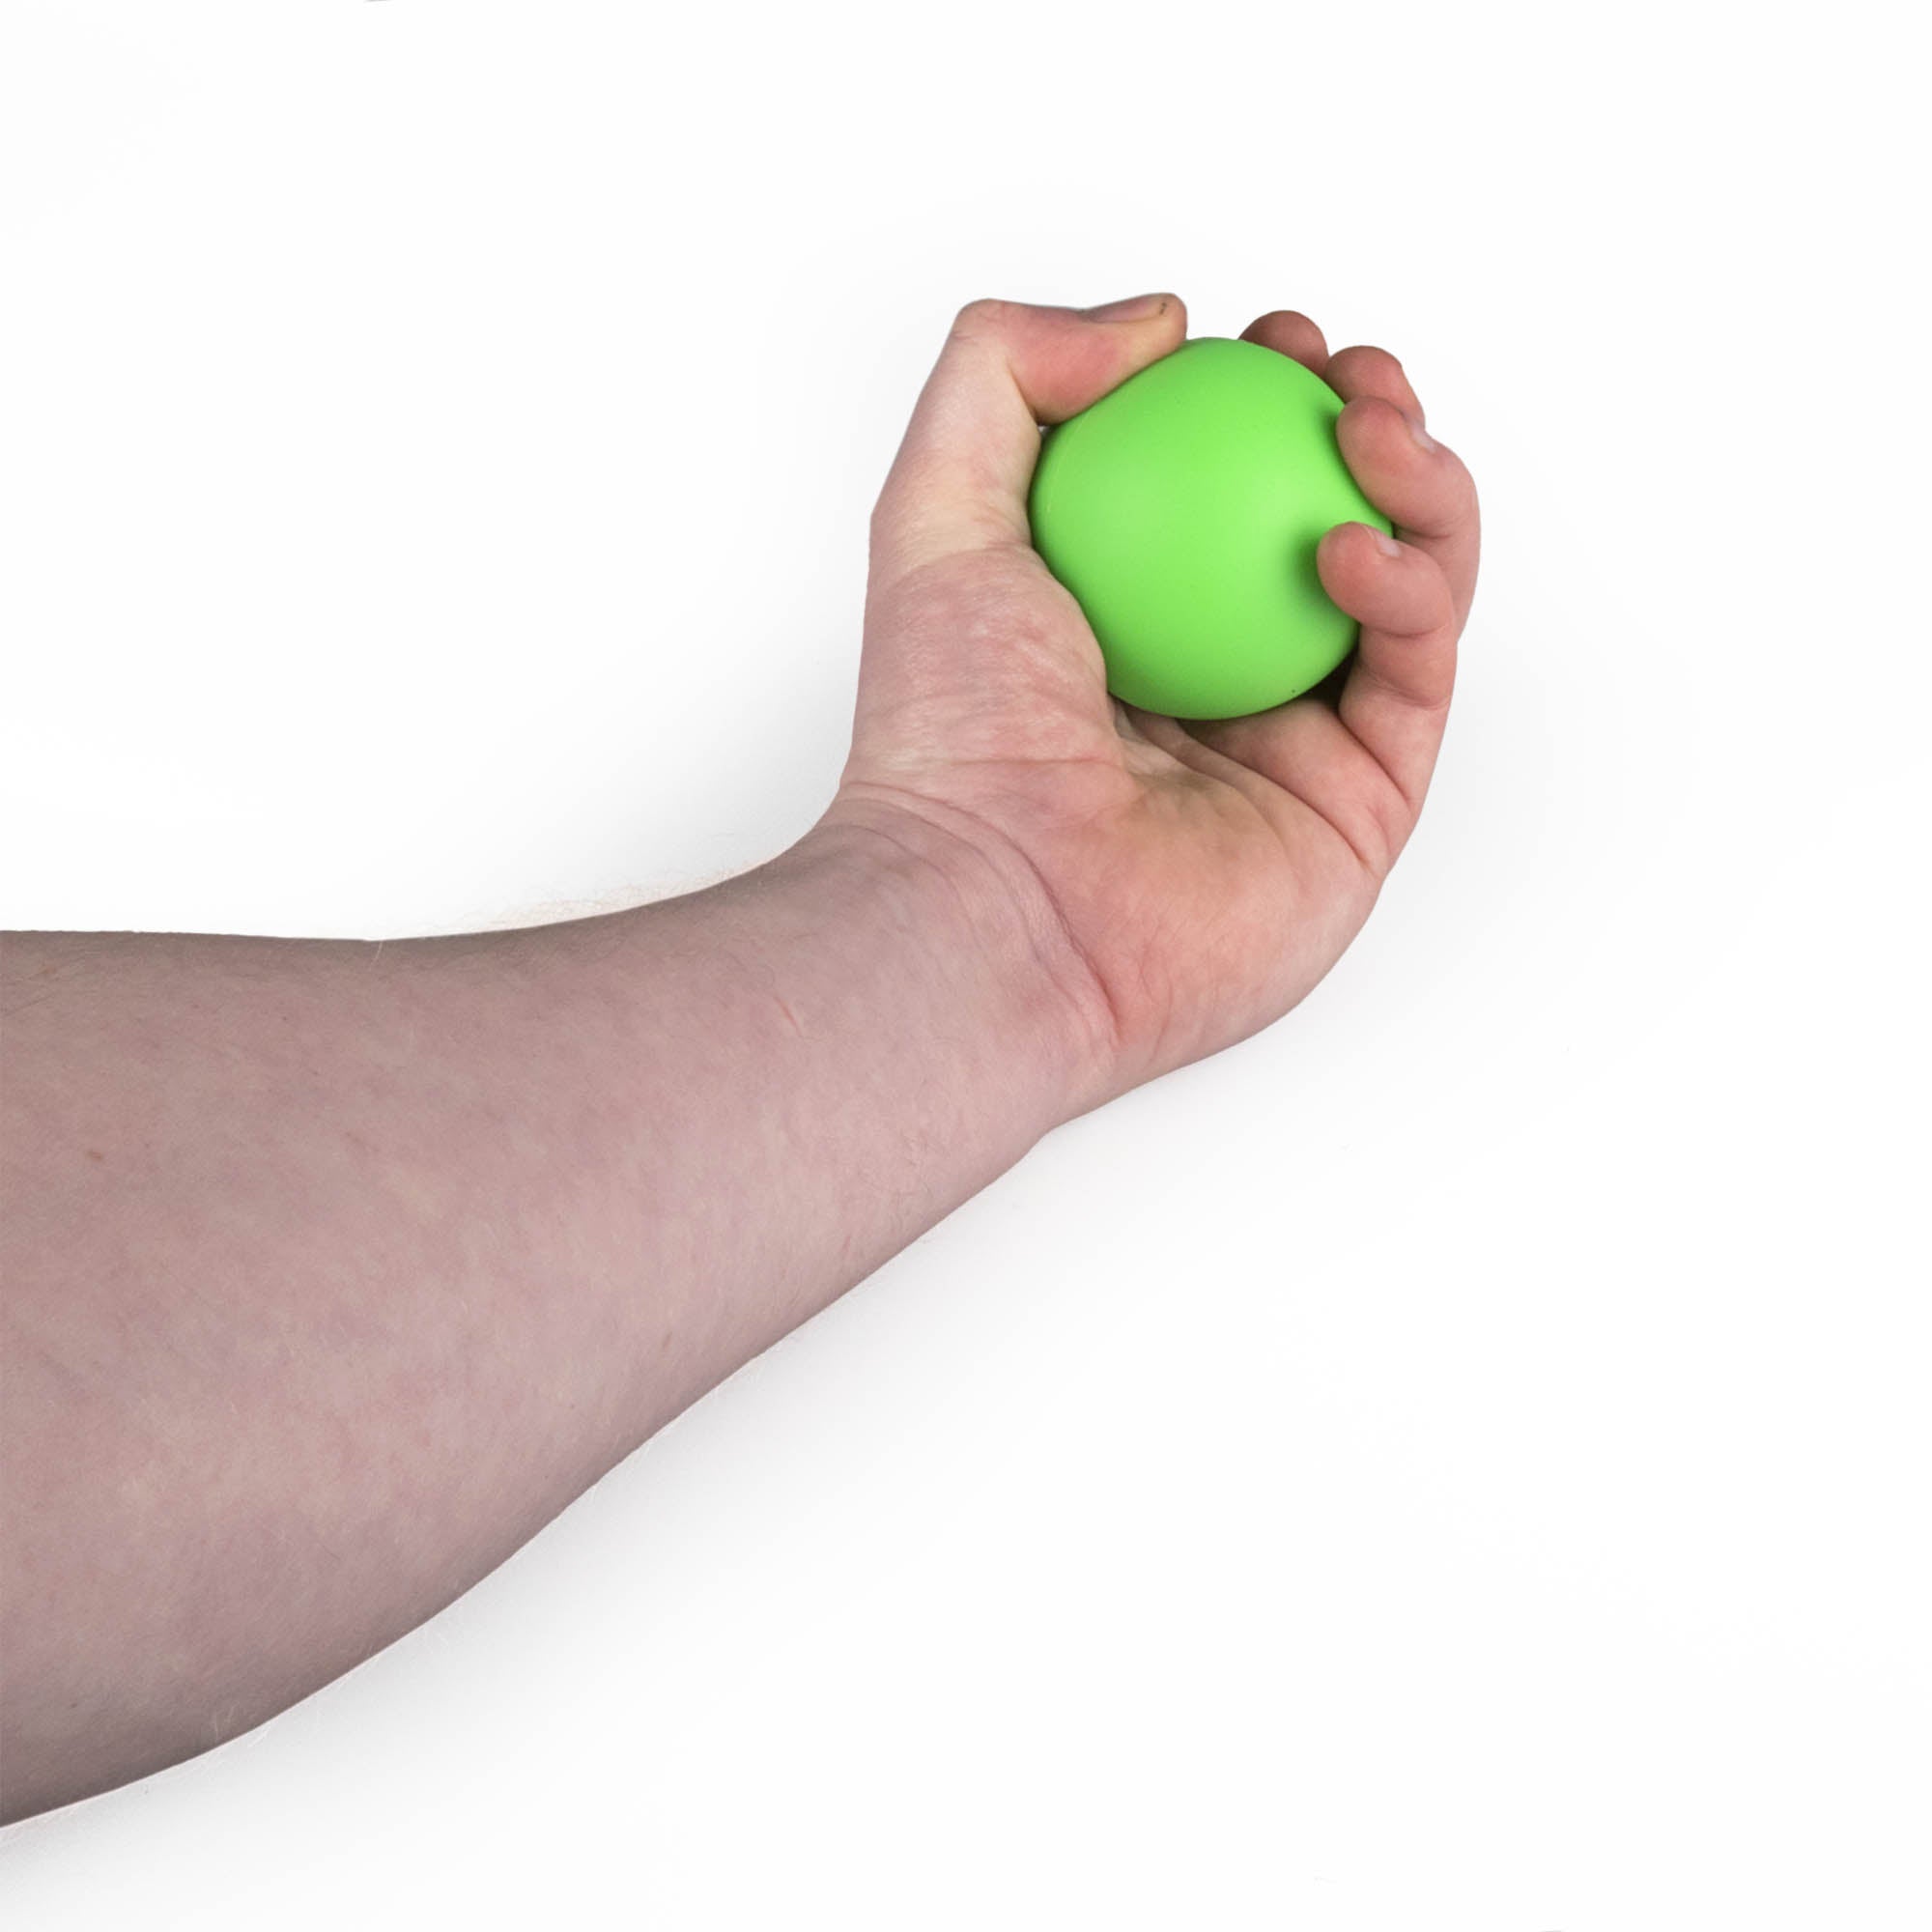 MMX 62mm Juggling ball green in hand